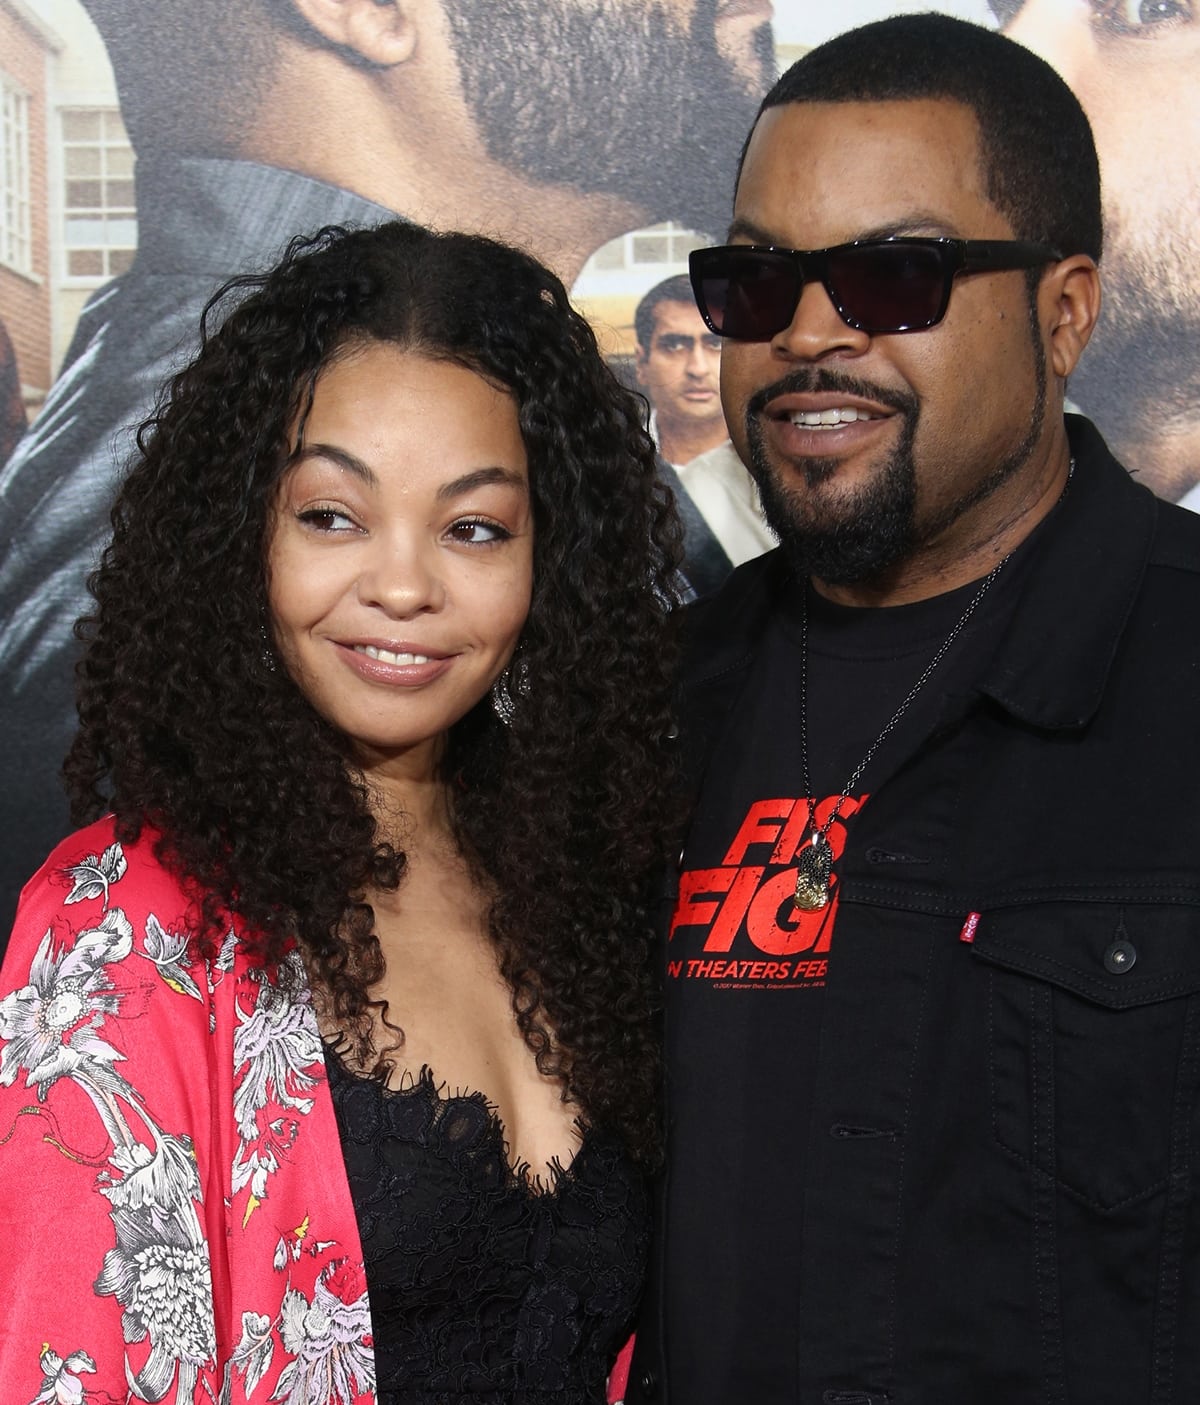 Kimberly Woodruff was a college student when she met Ice Cube for the first time in 1988